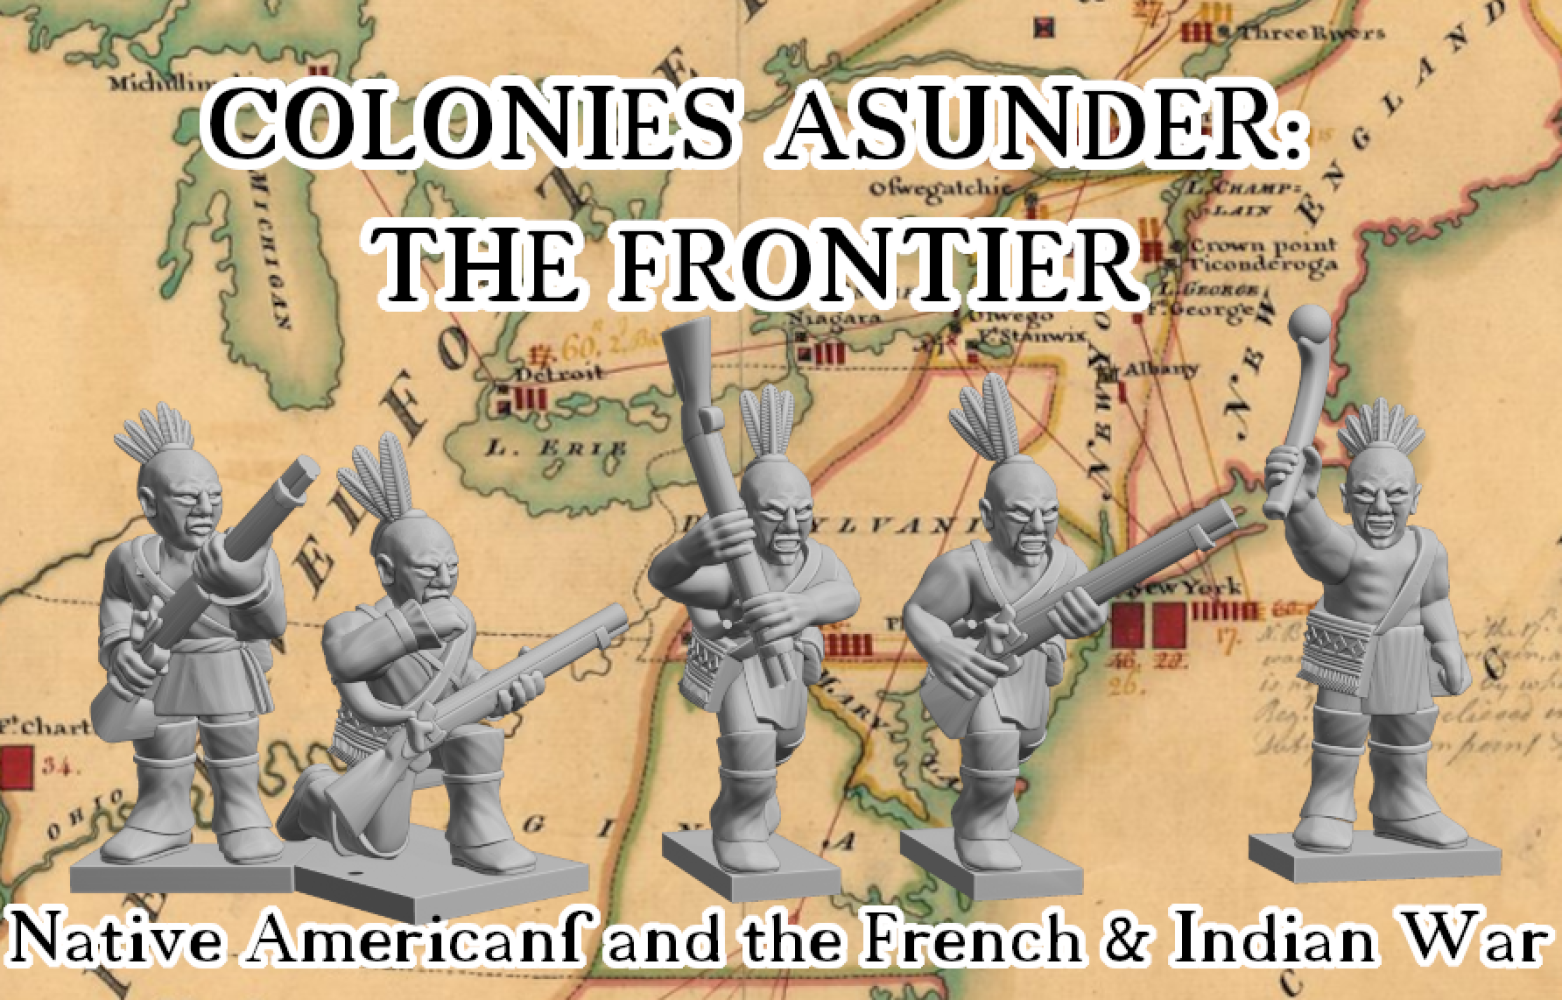 Early Bird - Colonies Asunder: Frontier STLs‎ ‎ ‎ ‎ ‎ ‎ ‎ ‎ ‎ ‎ ‎ ‎ ‎ ‎ ‎ ‎ ‎ ‎ ‎ ‎ ‎ ‎ ‎ ‎ ‎ ‎ ‎ ‎ ‎ ‎ ‎ ‎ ‎ ‎ ‎ ‎ ‎ ‎ ‎ ‎ ‎ ‎ ‎ ‎ ‎ 's Cover